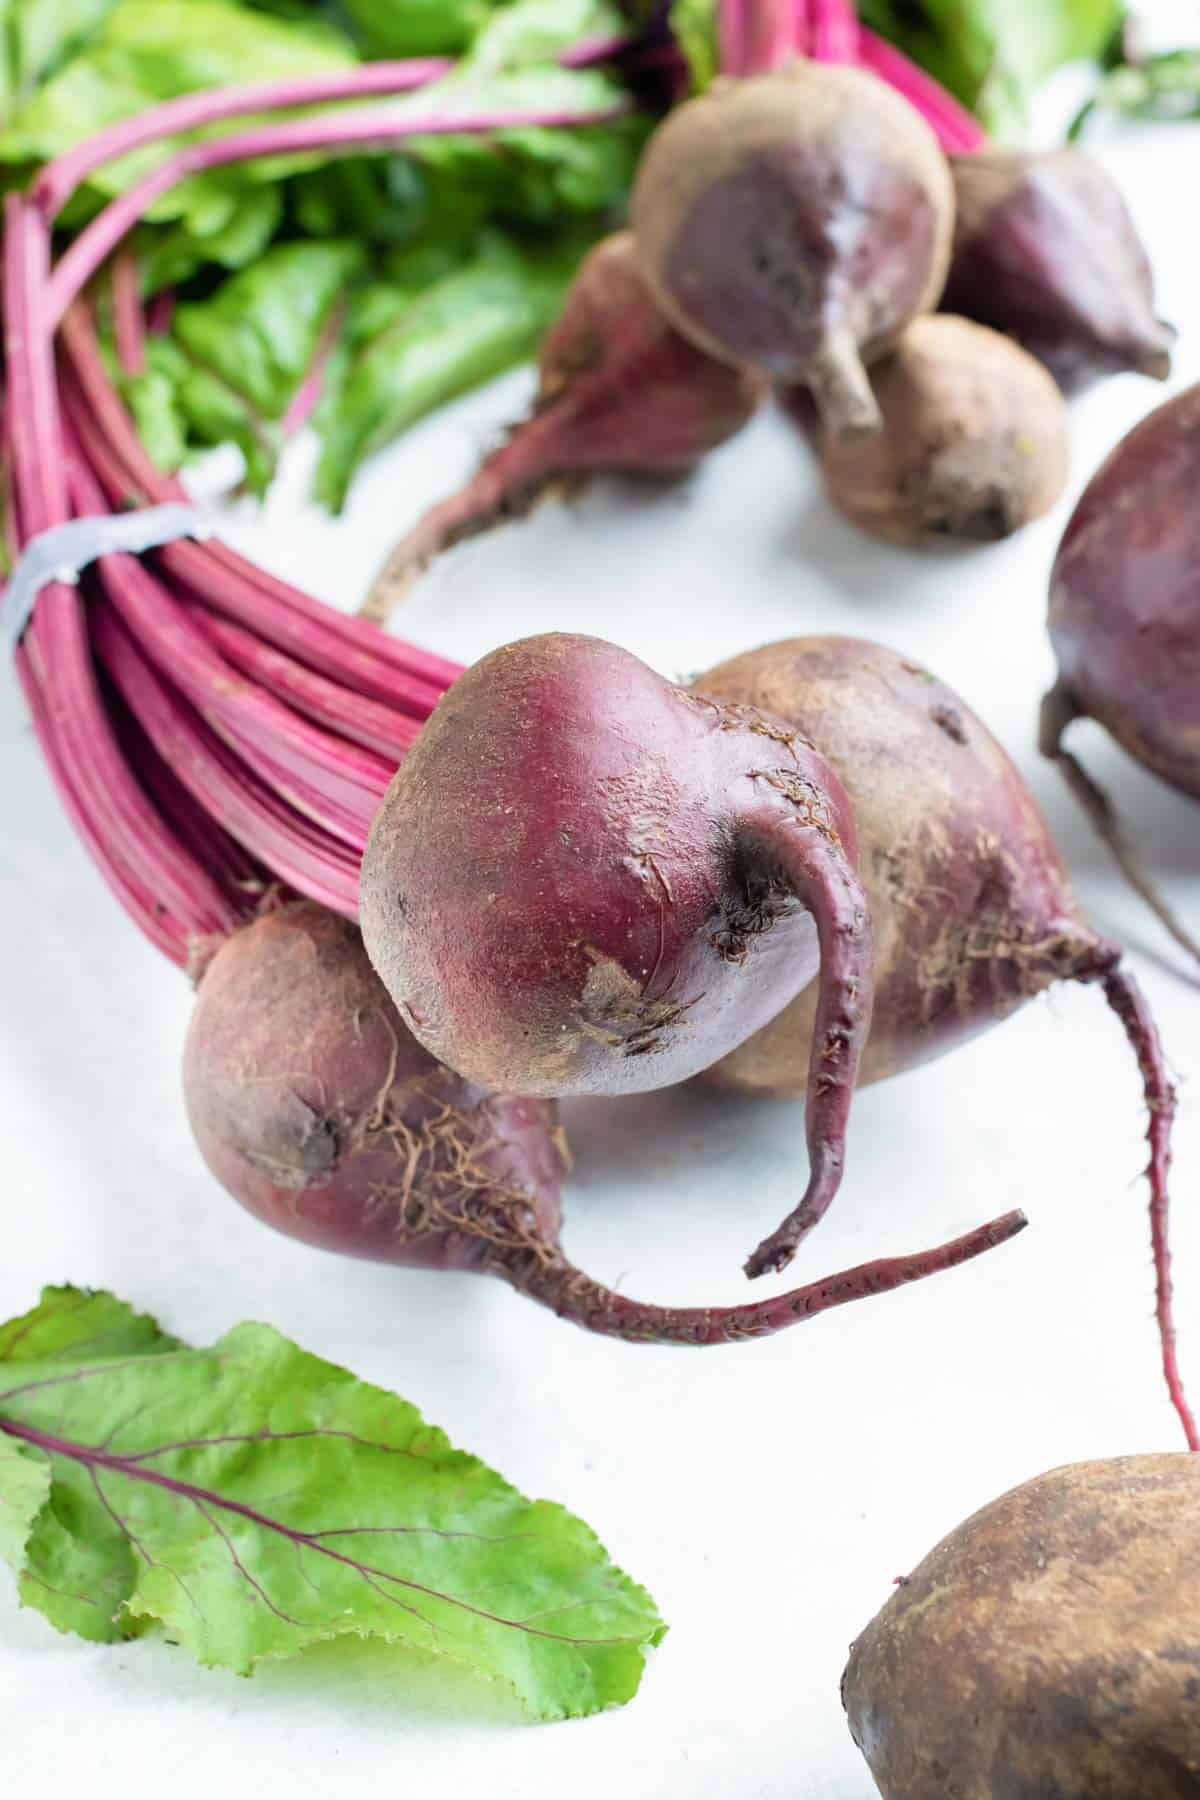 Learn how to pick beets for roasting.